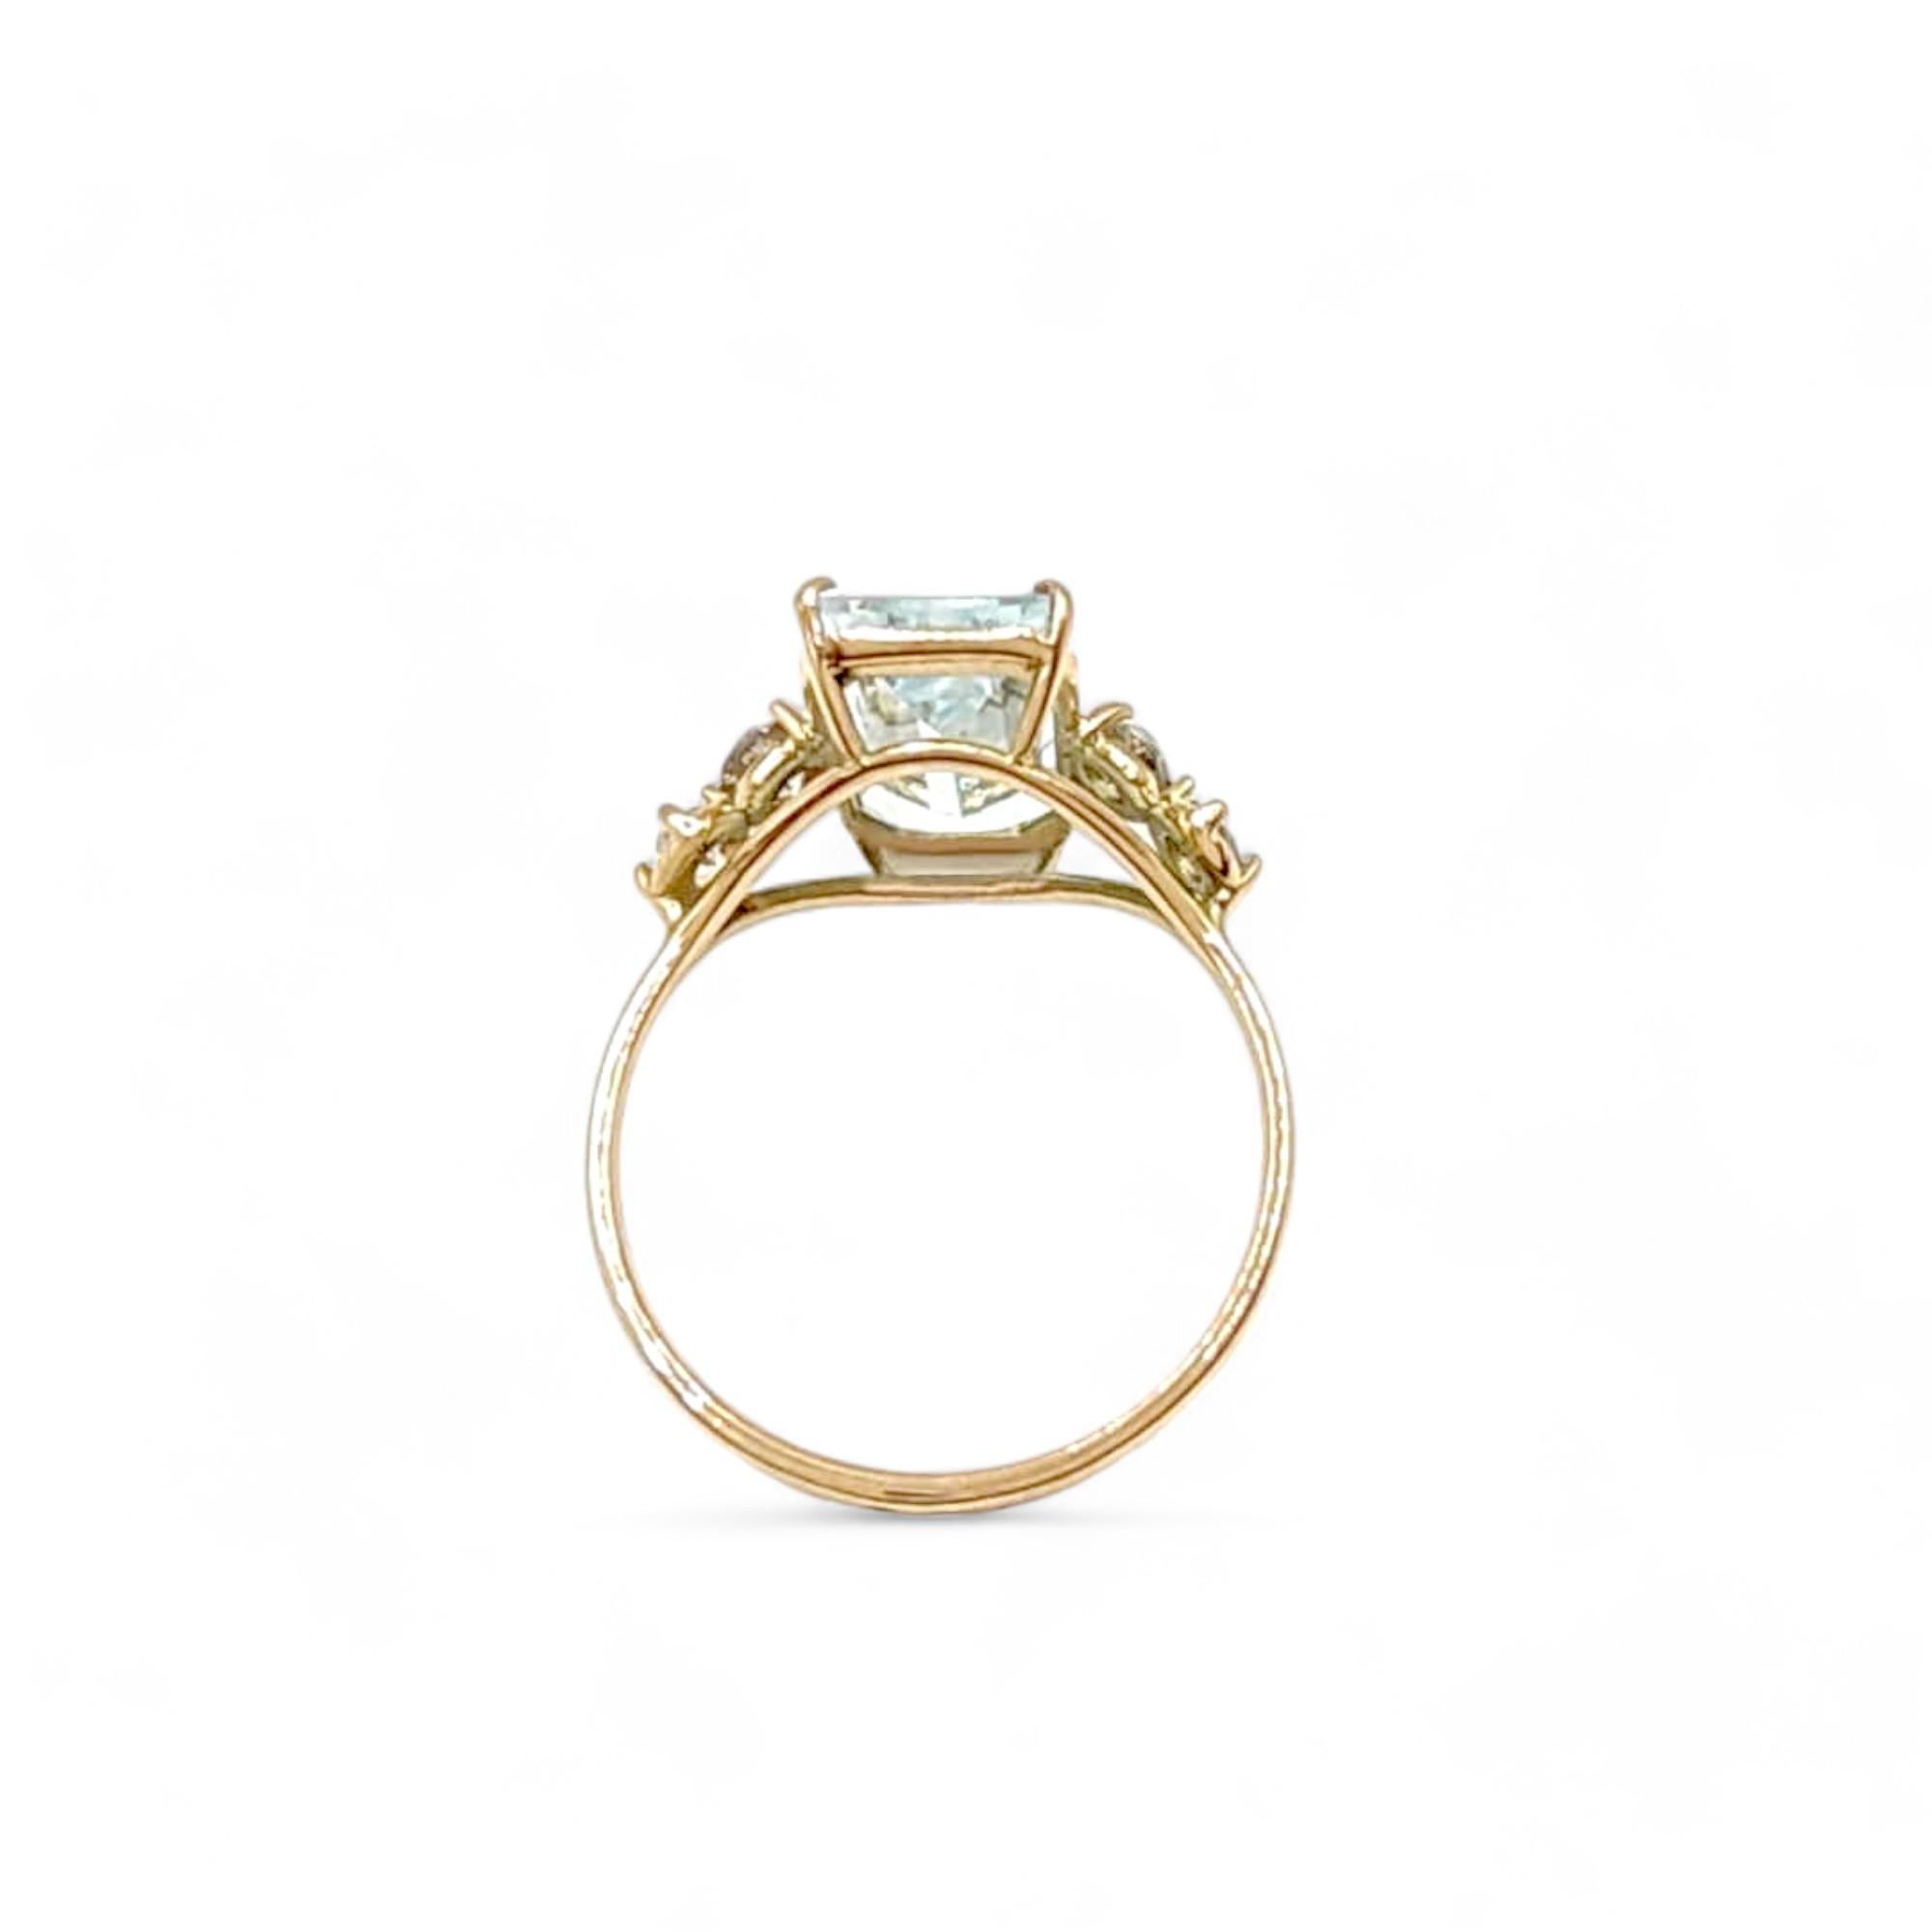 Certified 2.30 carats Aquamarine Engagement Ring - 14k Gold with Diamonds For Sale 3